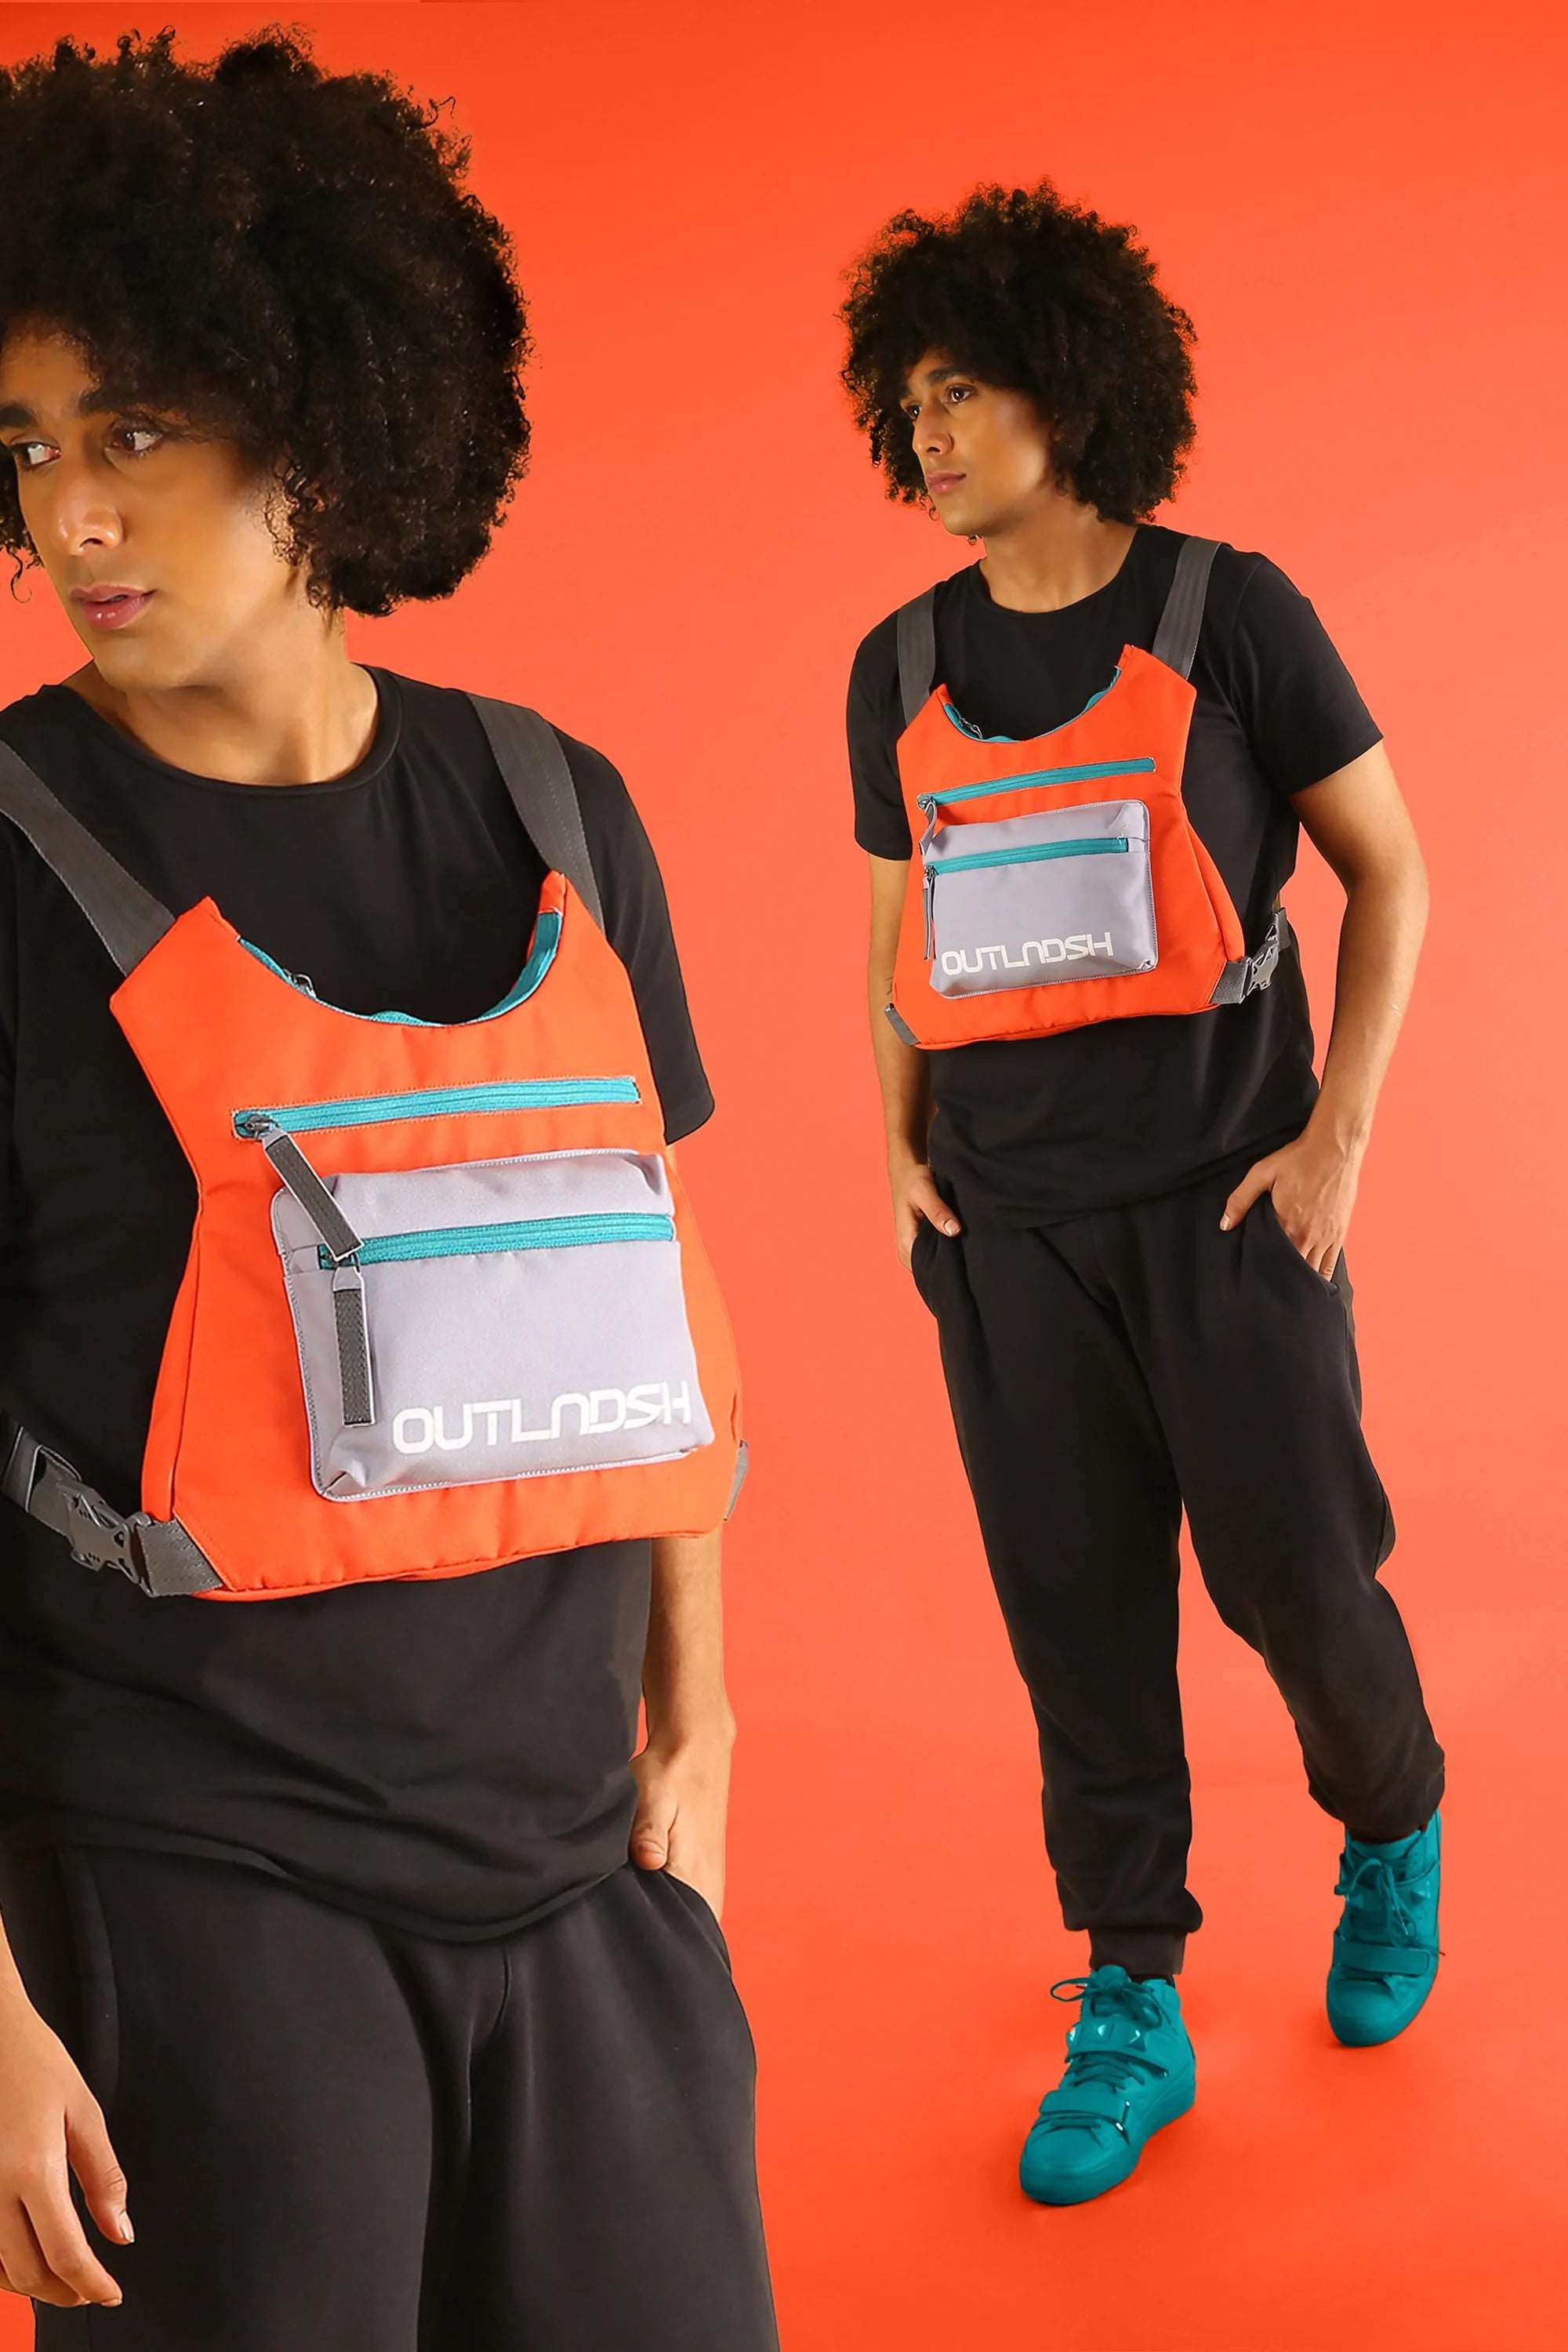 OUTLNDSH Chest Bag Orange Color Urban Tactical style 